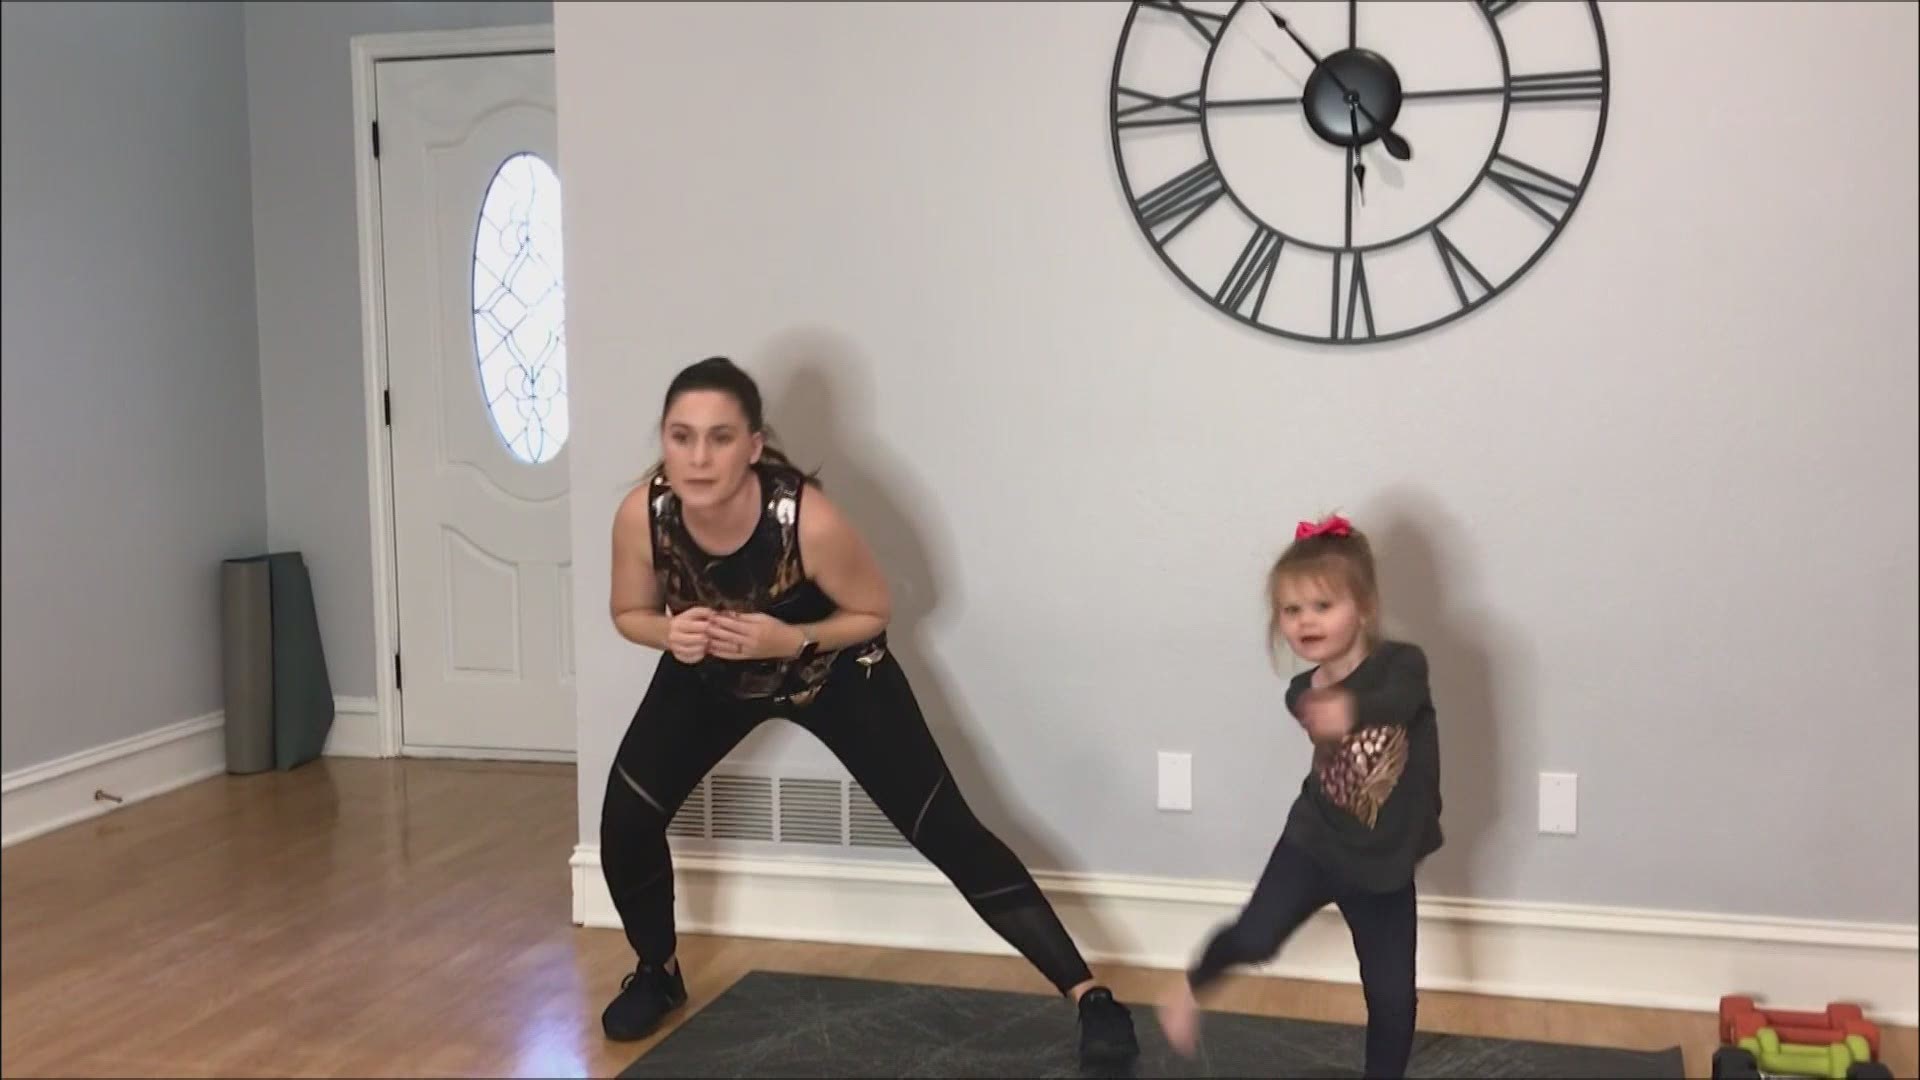 Sagan McCullough knows all about mom life. She also teaches six HIIT classes a week on Zoom-- which she started after gyms closed, during the pandemic.